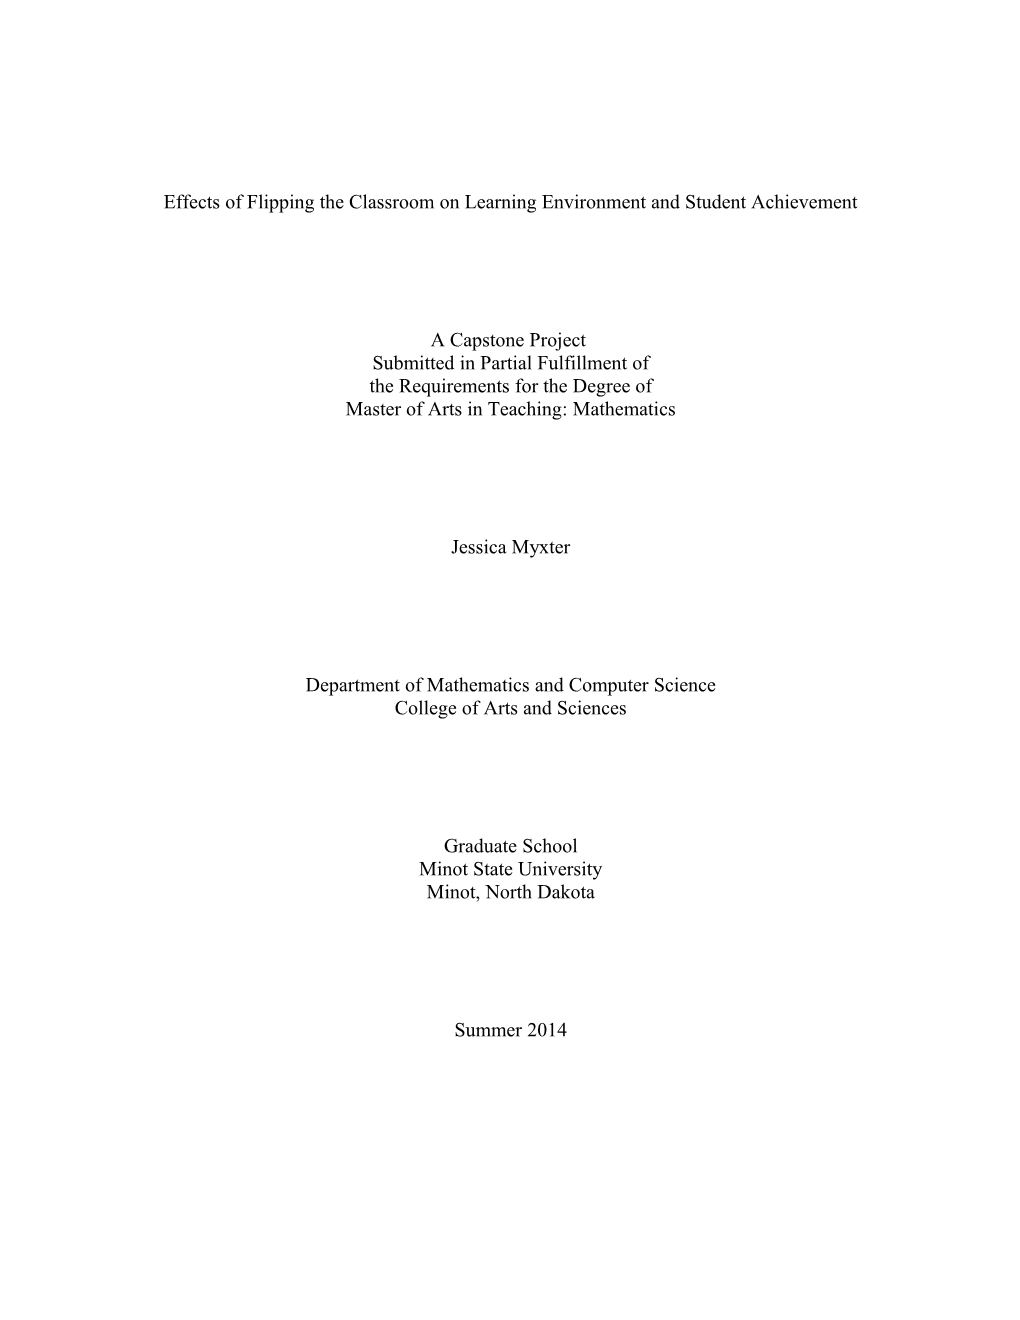 Effects of Flipping the Classroom on Learning Environment and Student Achievement